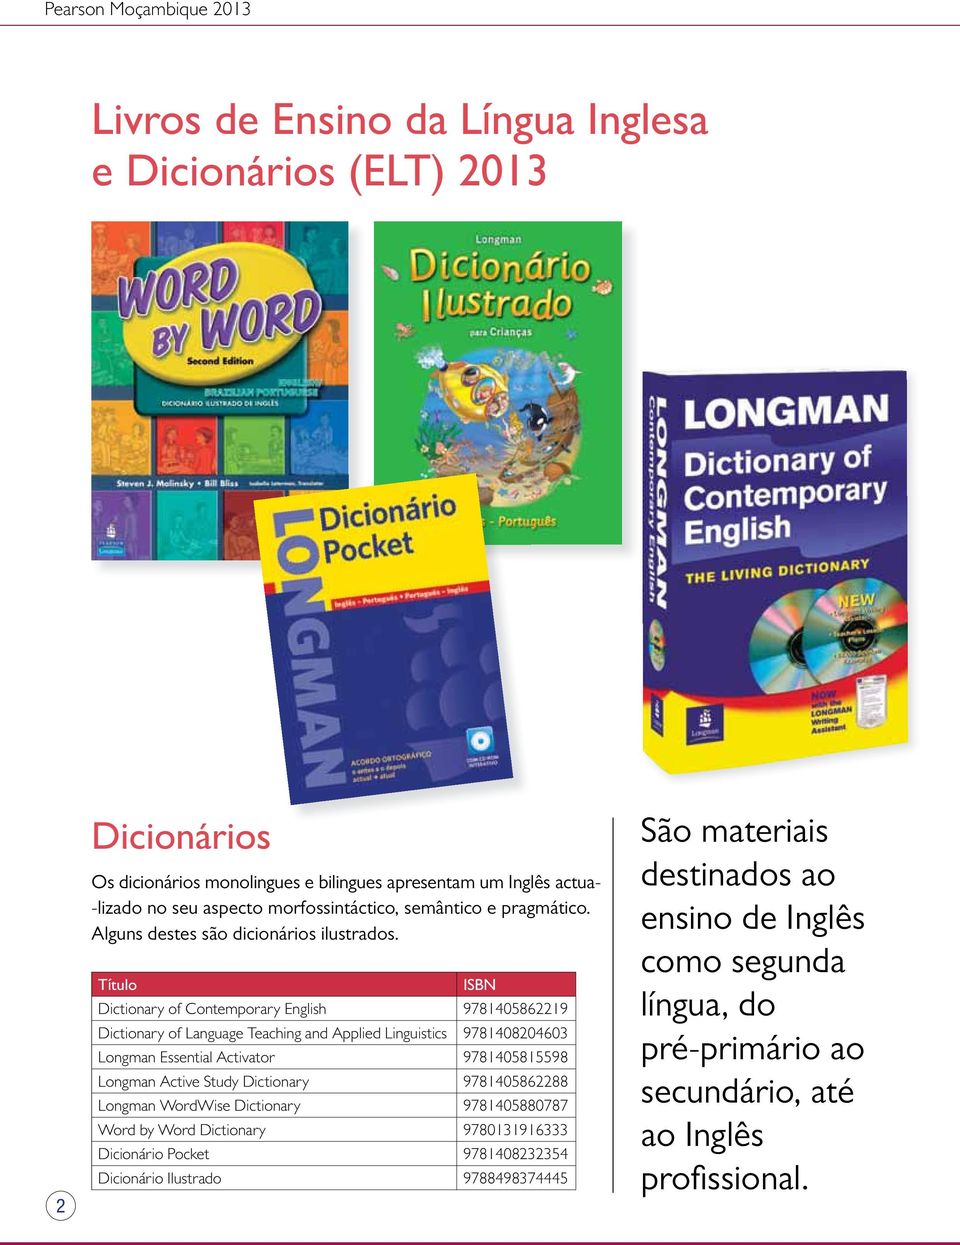 Dictionary of Contemporary English 9781405862219 Dictionary of Language Teaching and Applied Linguistics 9781408204603 Longman Essential Activator 9781405815598 Longman Active Study